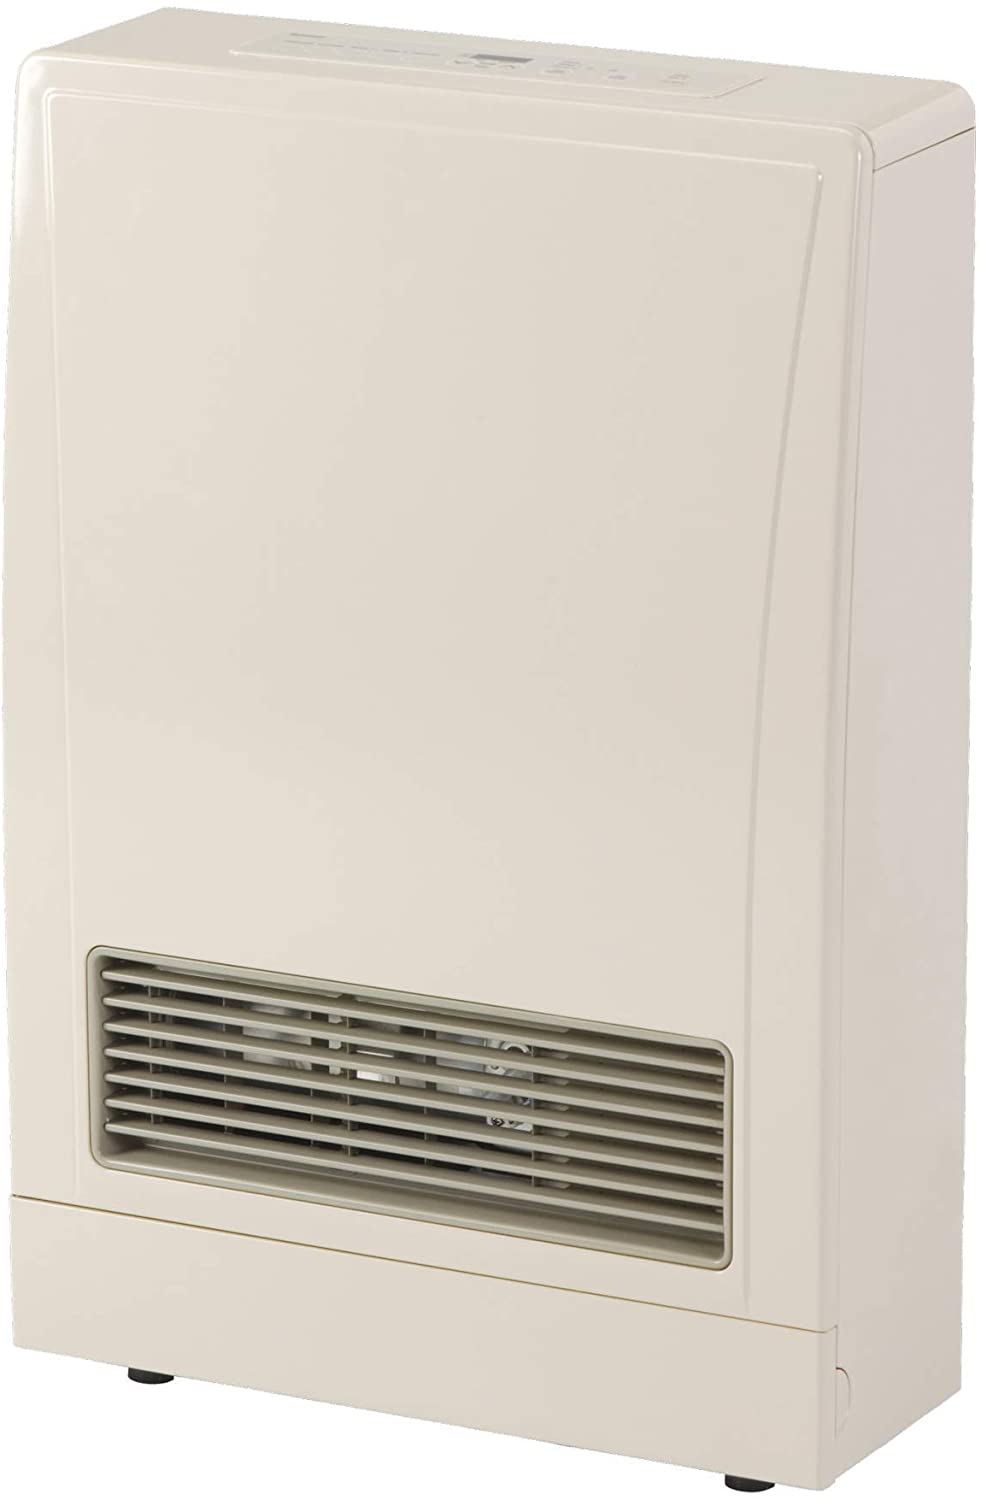 Rinnai EX11CT Direct Vent Wall Furnace Heater C-Series Wall Thermostat